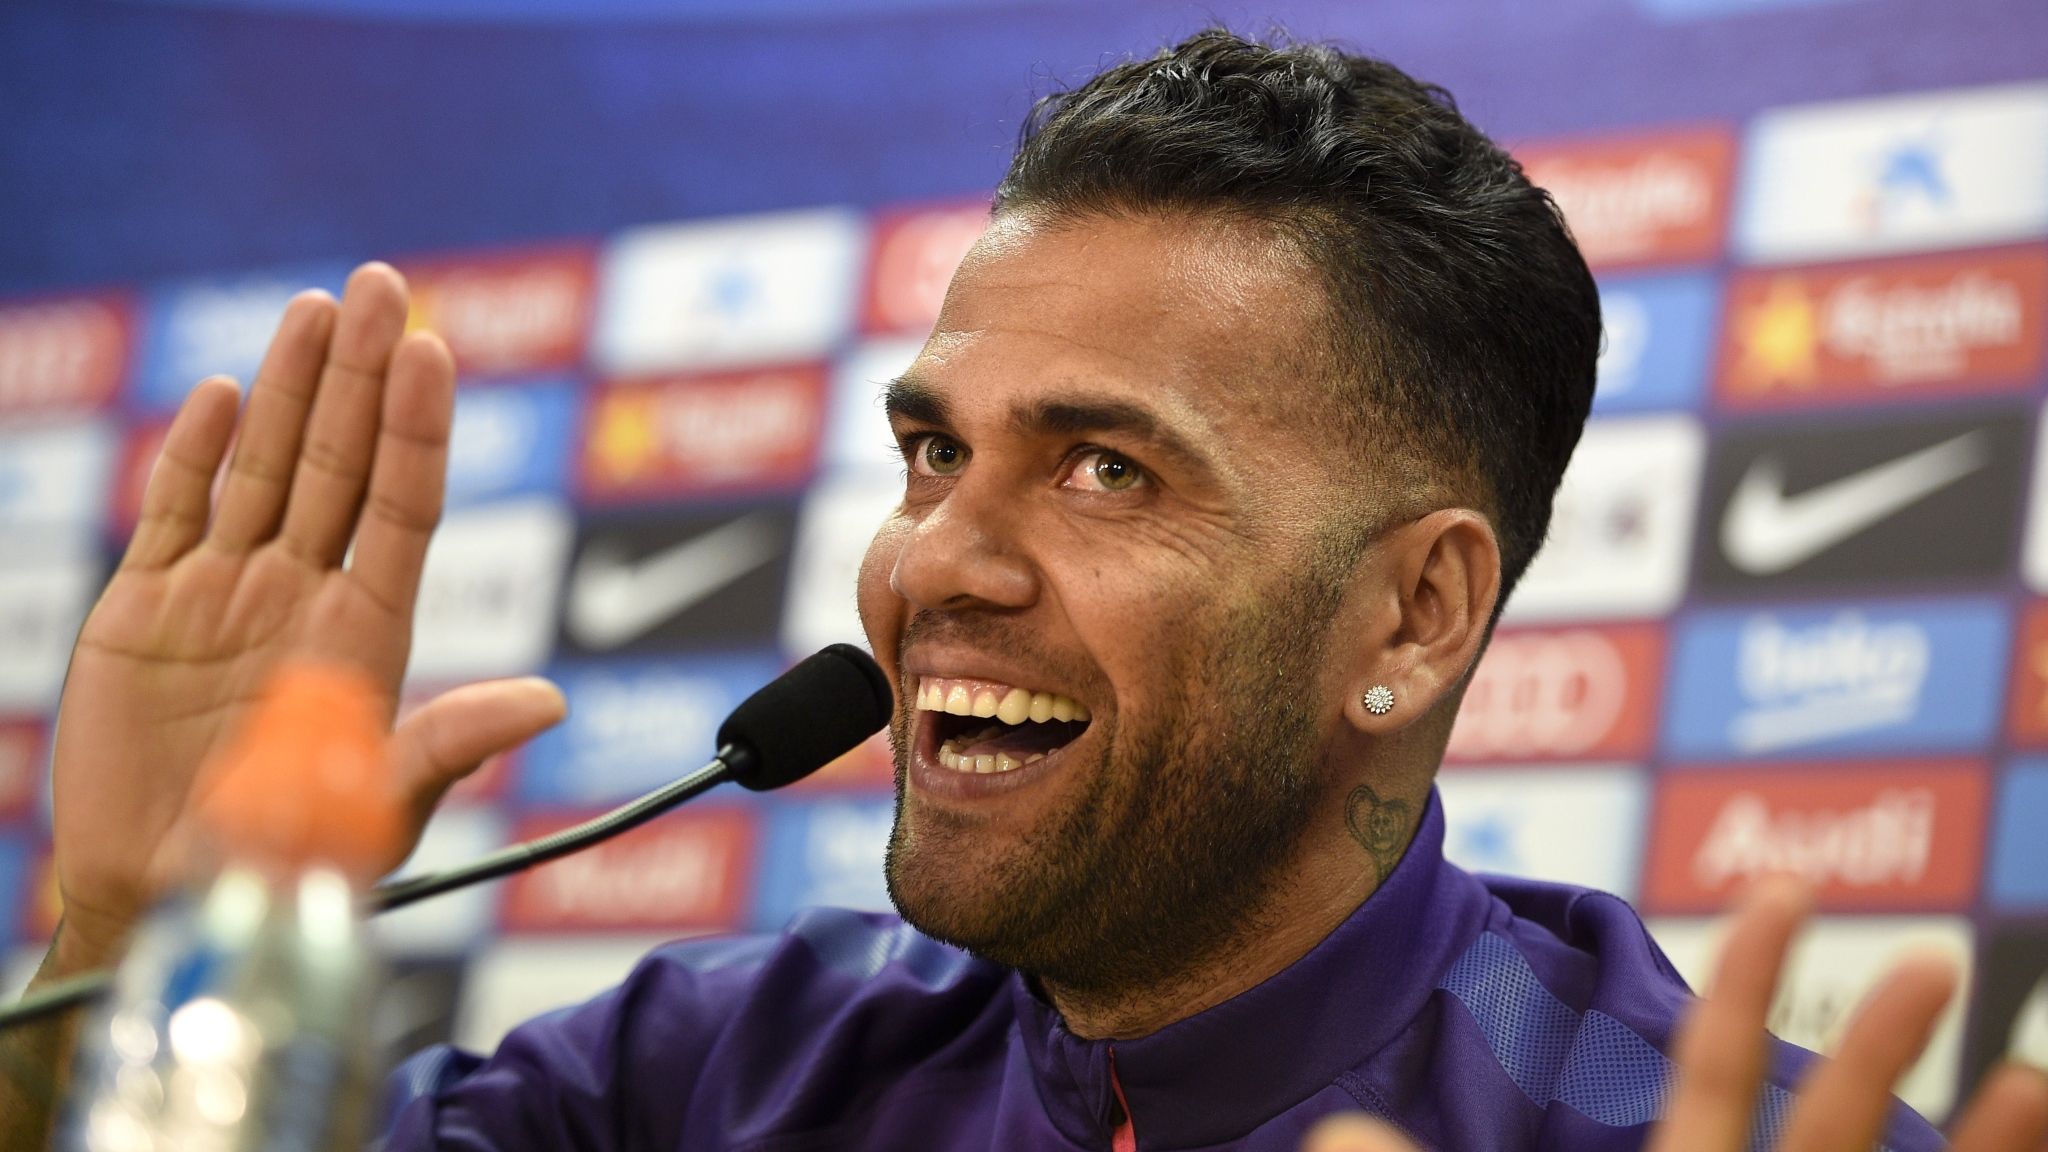 WATCH: Barcelona star Dani Alves is relaxed ahead of the Champions League  final | Football News | Sky Sports